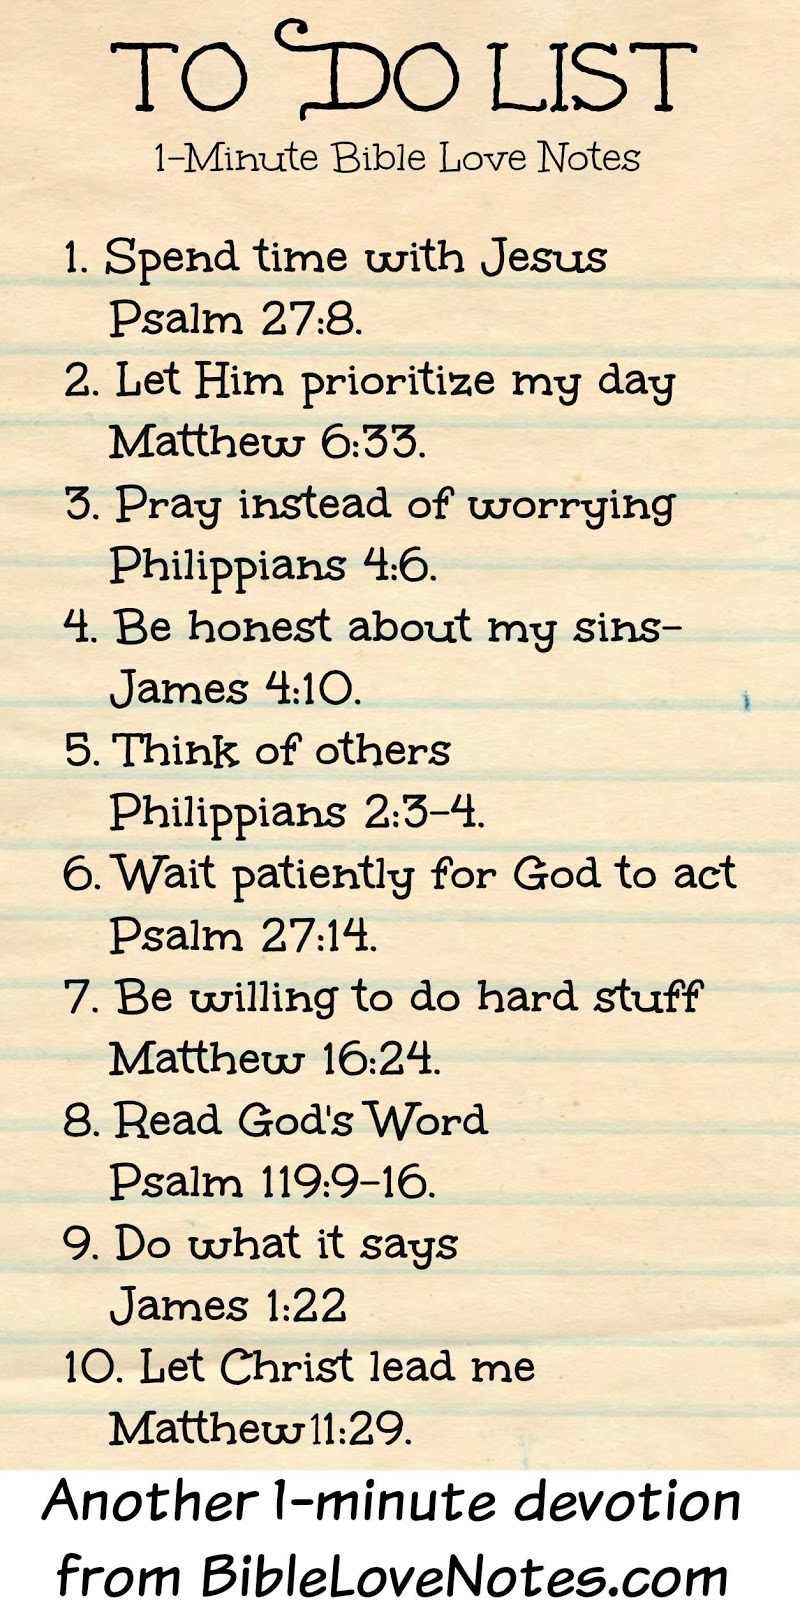 1-Minute Bible Love Notes: Every Christian's To Do List